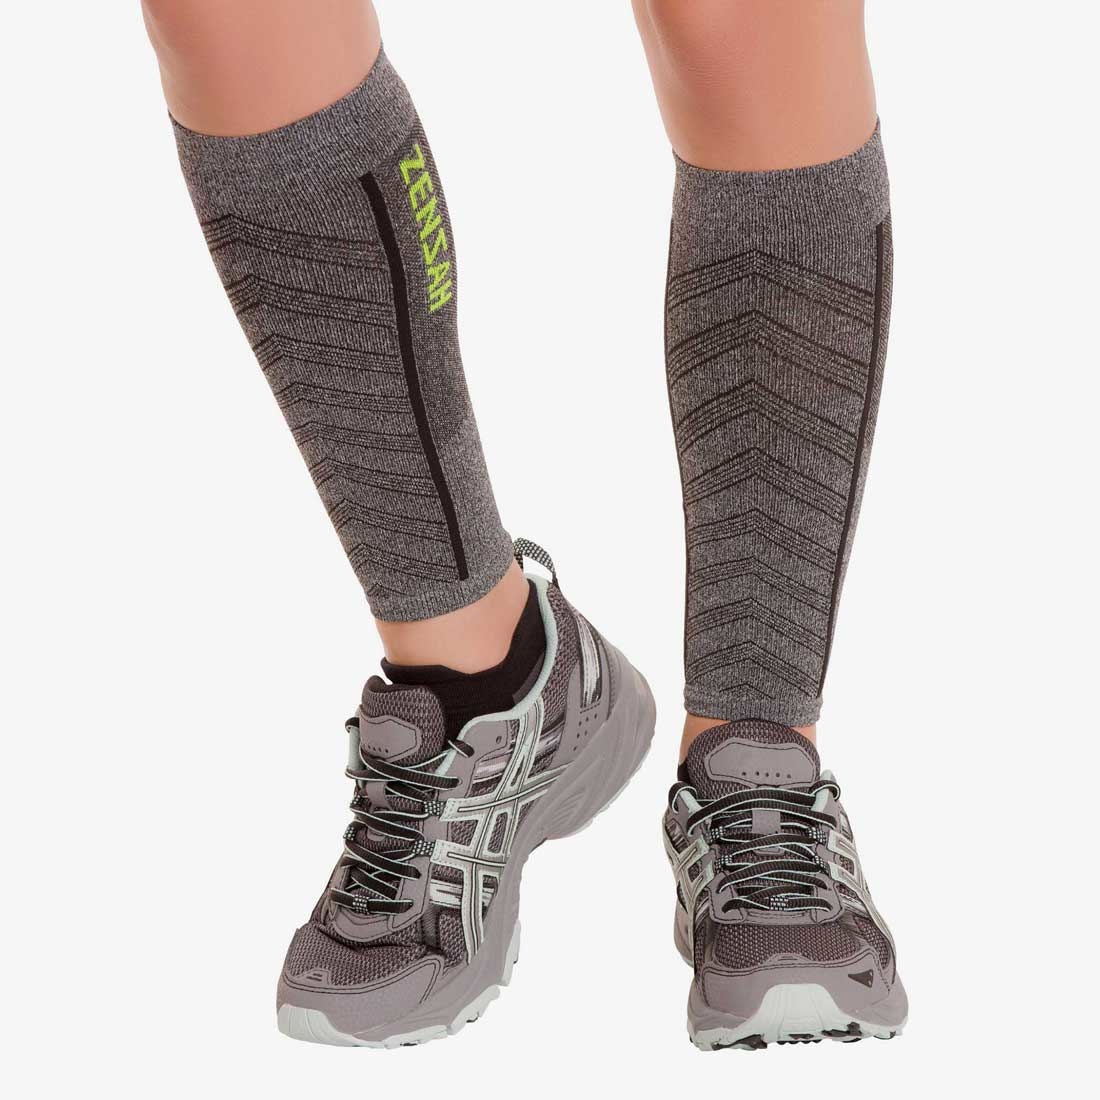 Zensah Featherweight Compression Leg Sleeves - Quest Outdoors